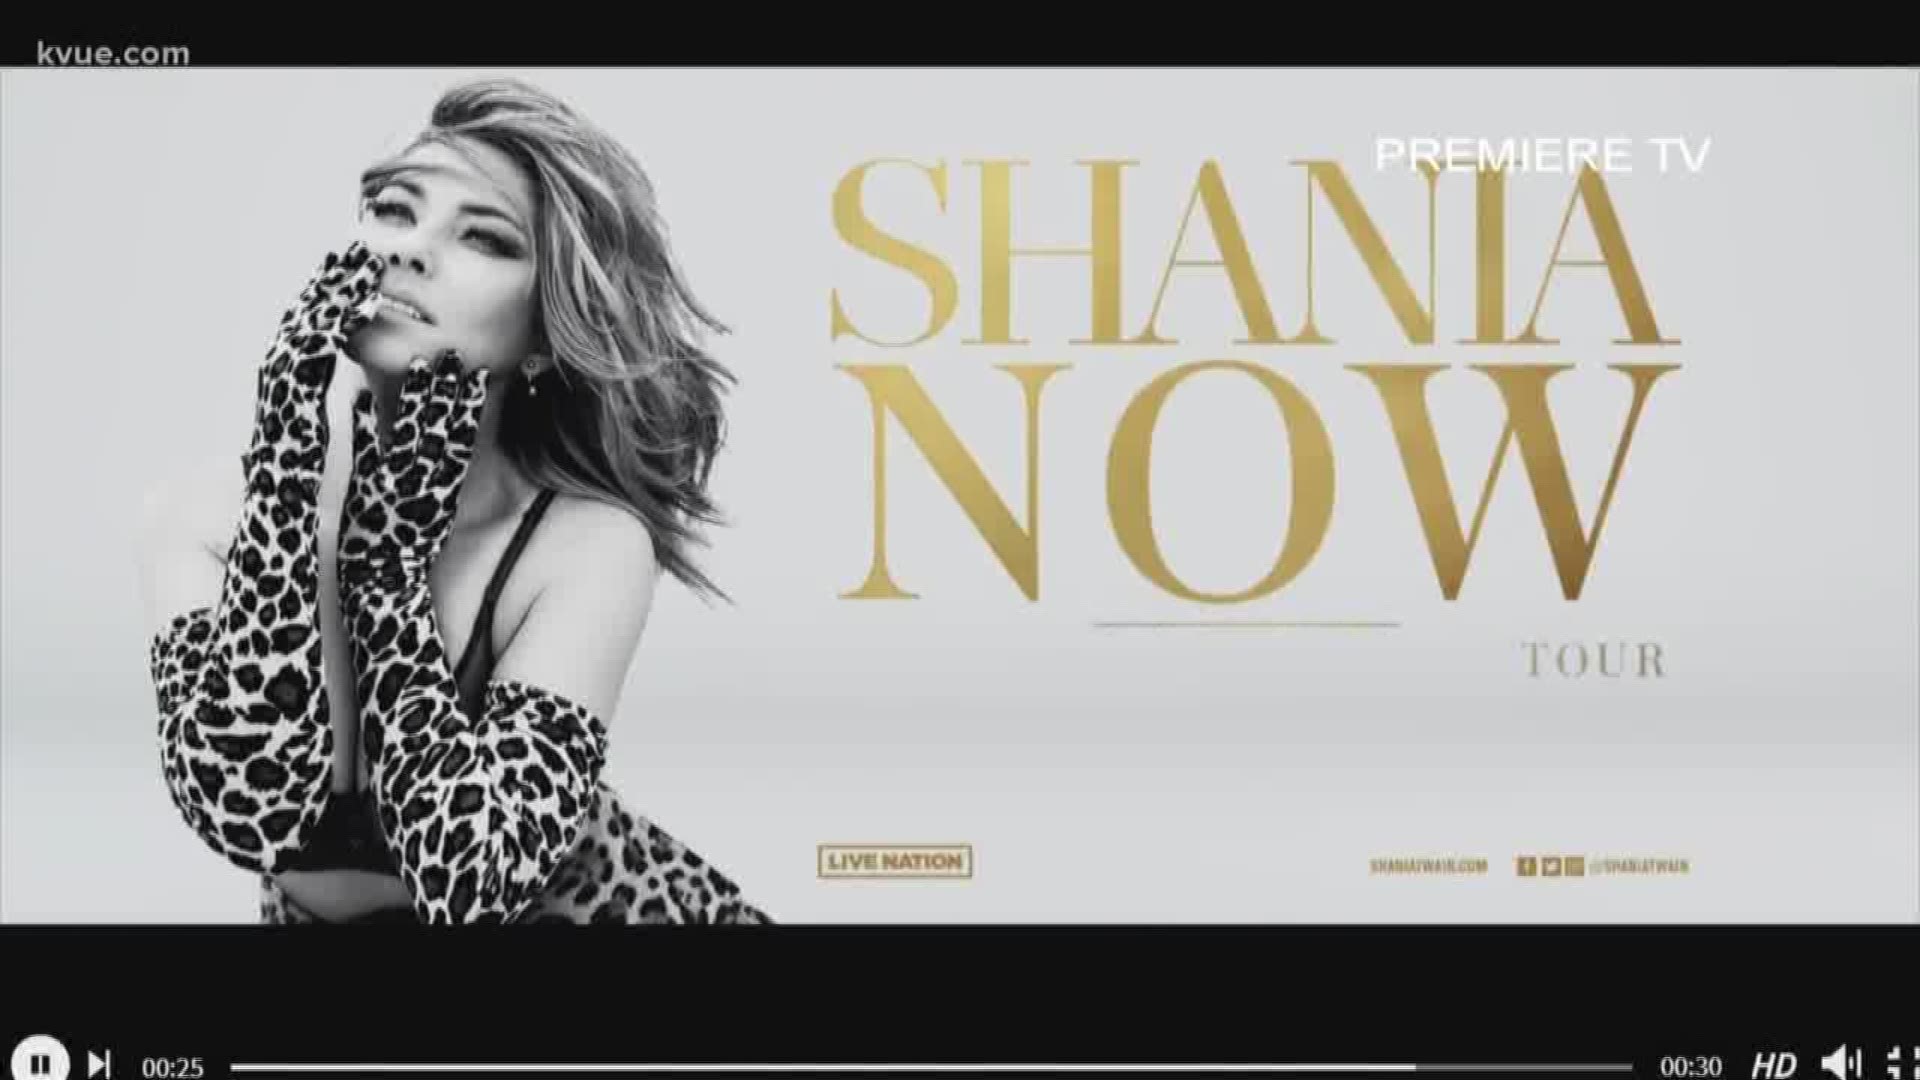 Five-time grammy award winner and top selling female country artist of all time -- Shania Twain -- is getting ready to hit the road for her "NOW" tour.